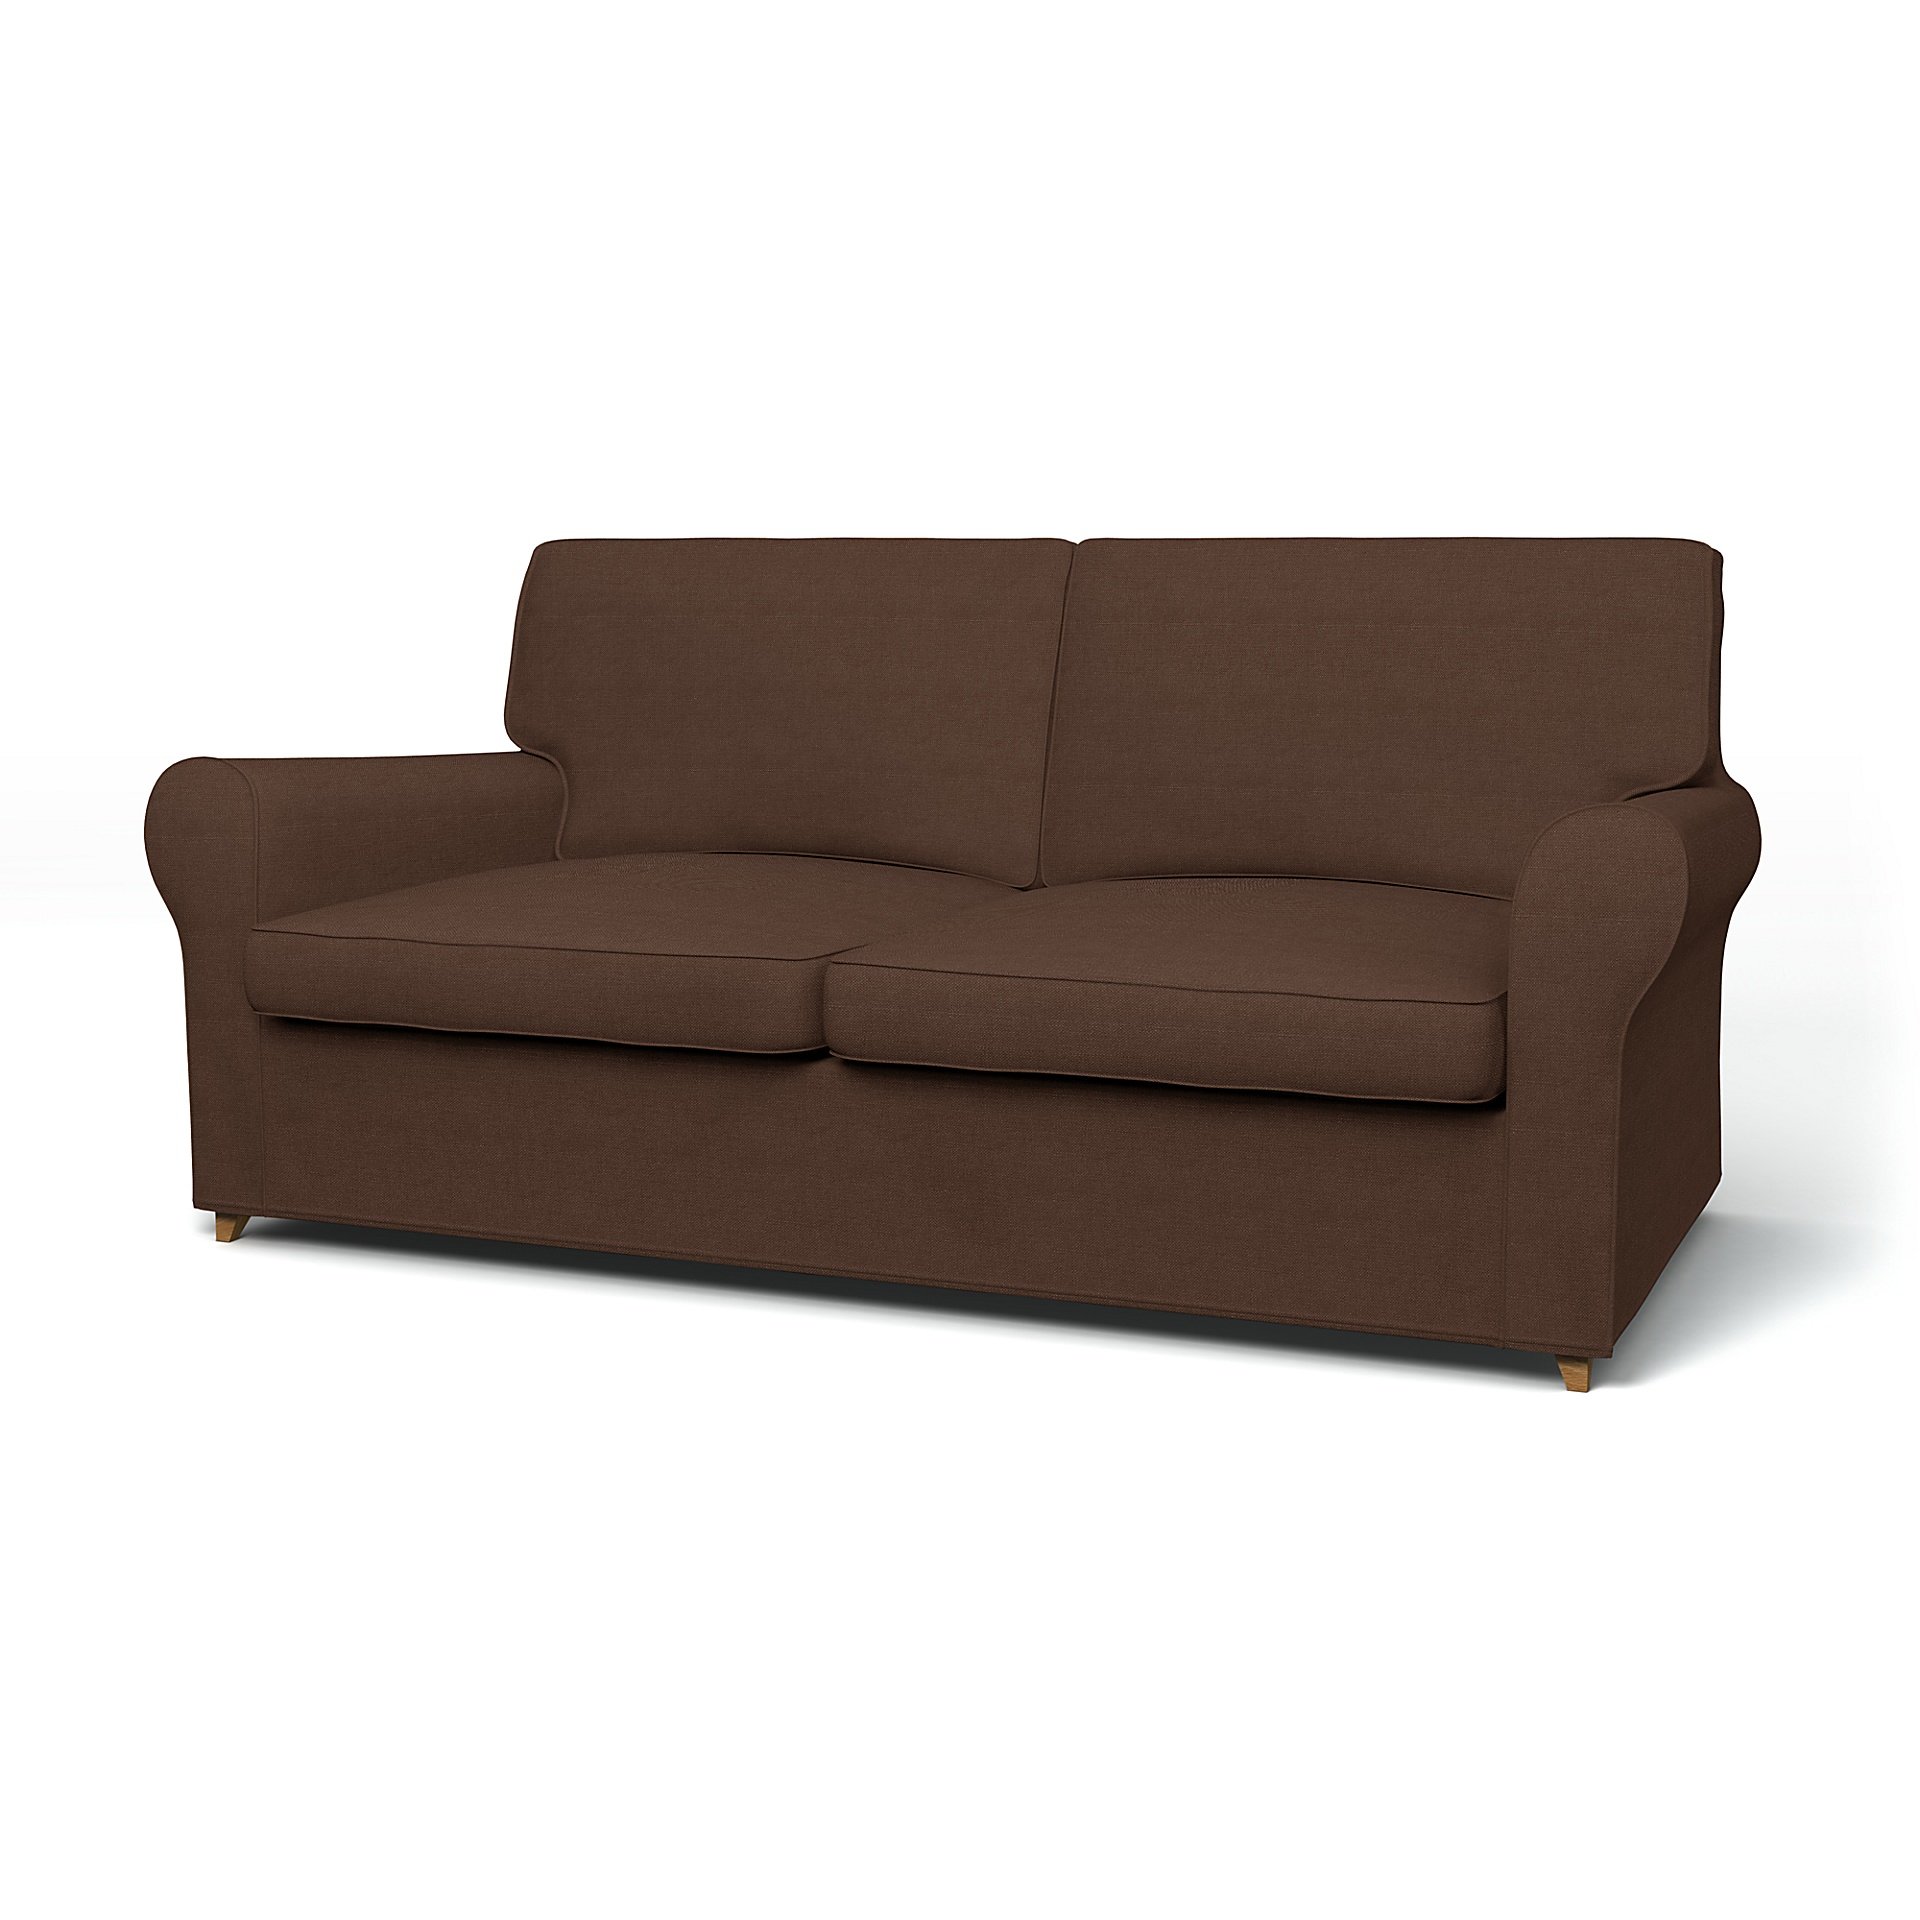 IKEA - Angby Sofa Bed Cover, Chocolate, Linen - Bemz